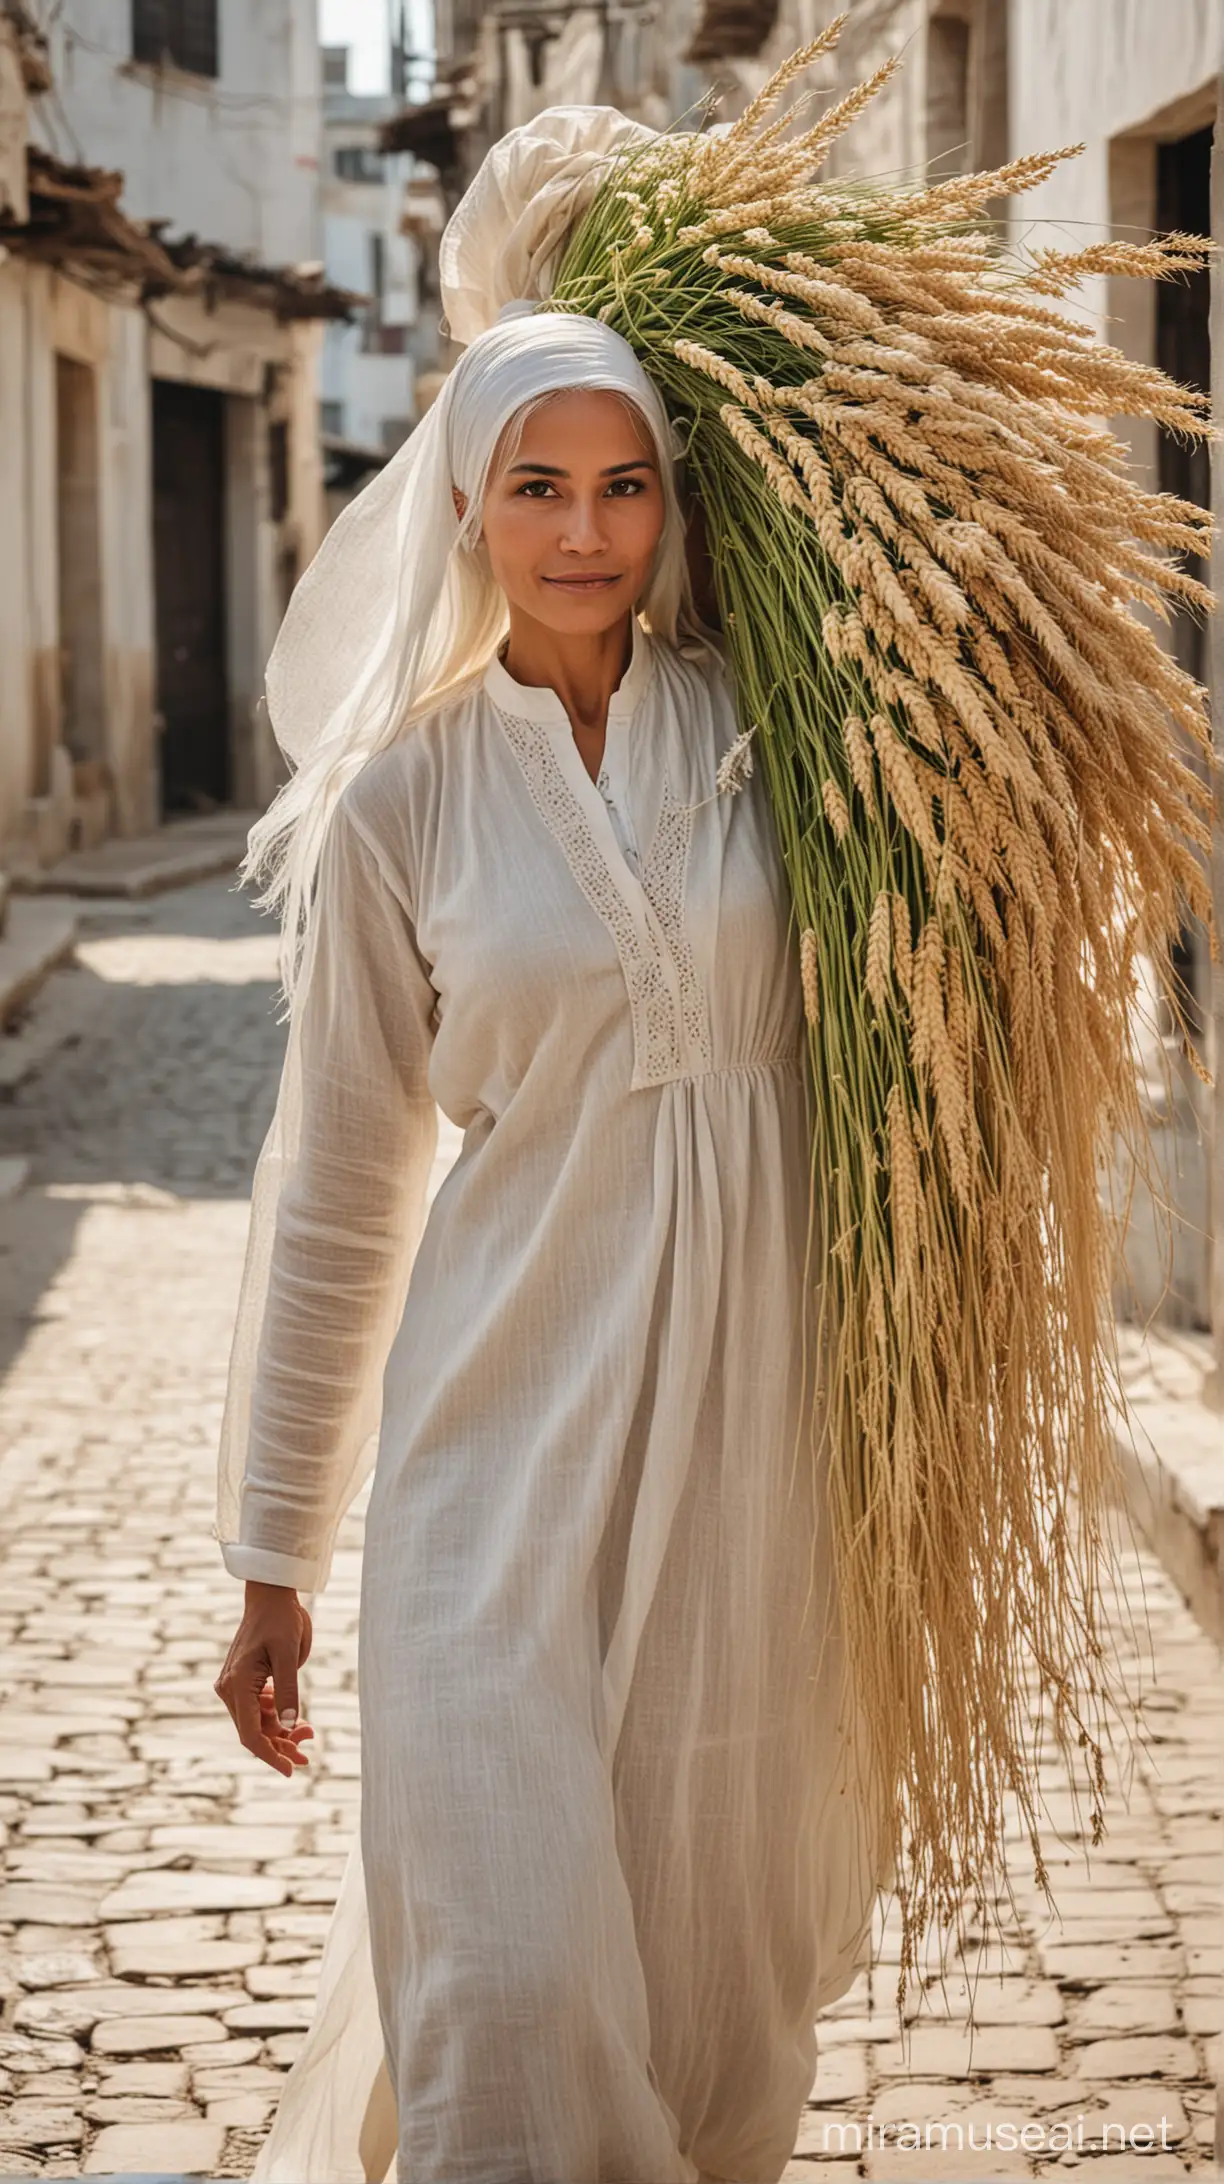 Javanese Woman Carrying Wheat Flowers in Tunisian City